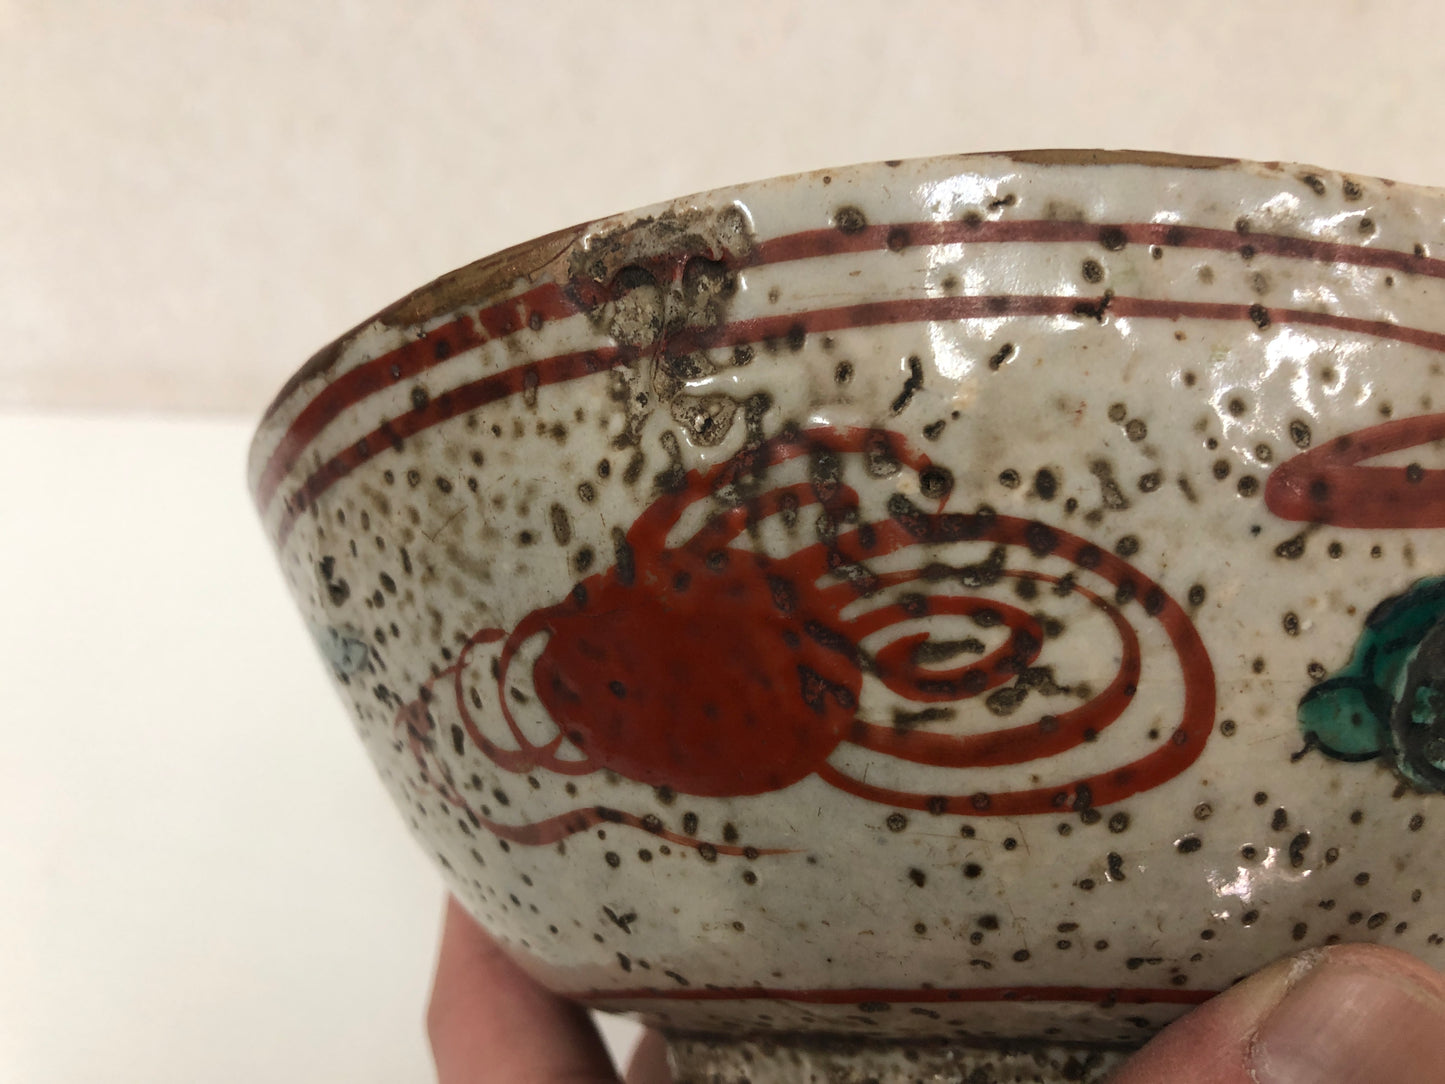 Y3919 CHAWAN Inuyama-ware red picture kintsugi box Japan confectionery bowl